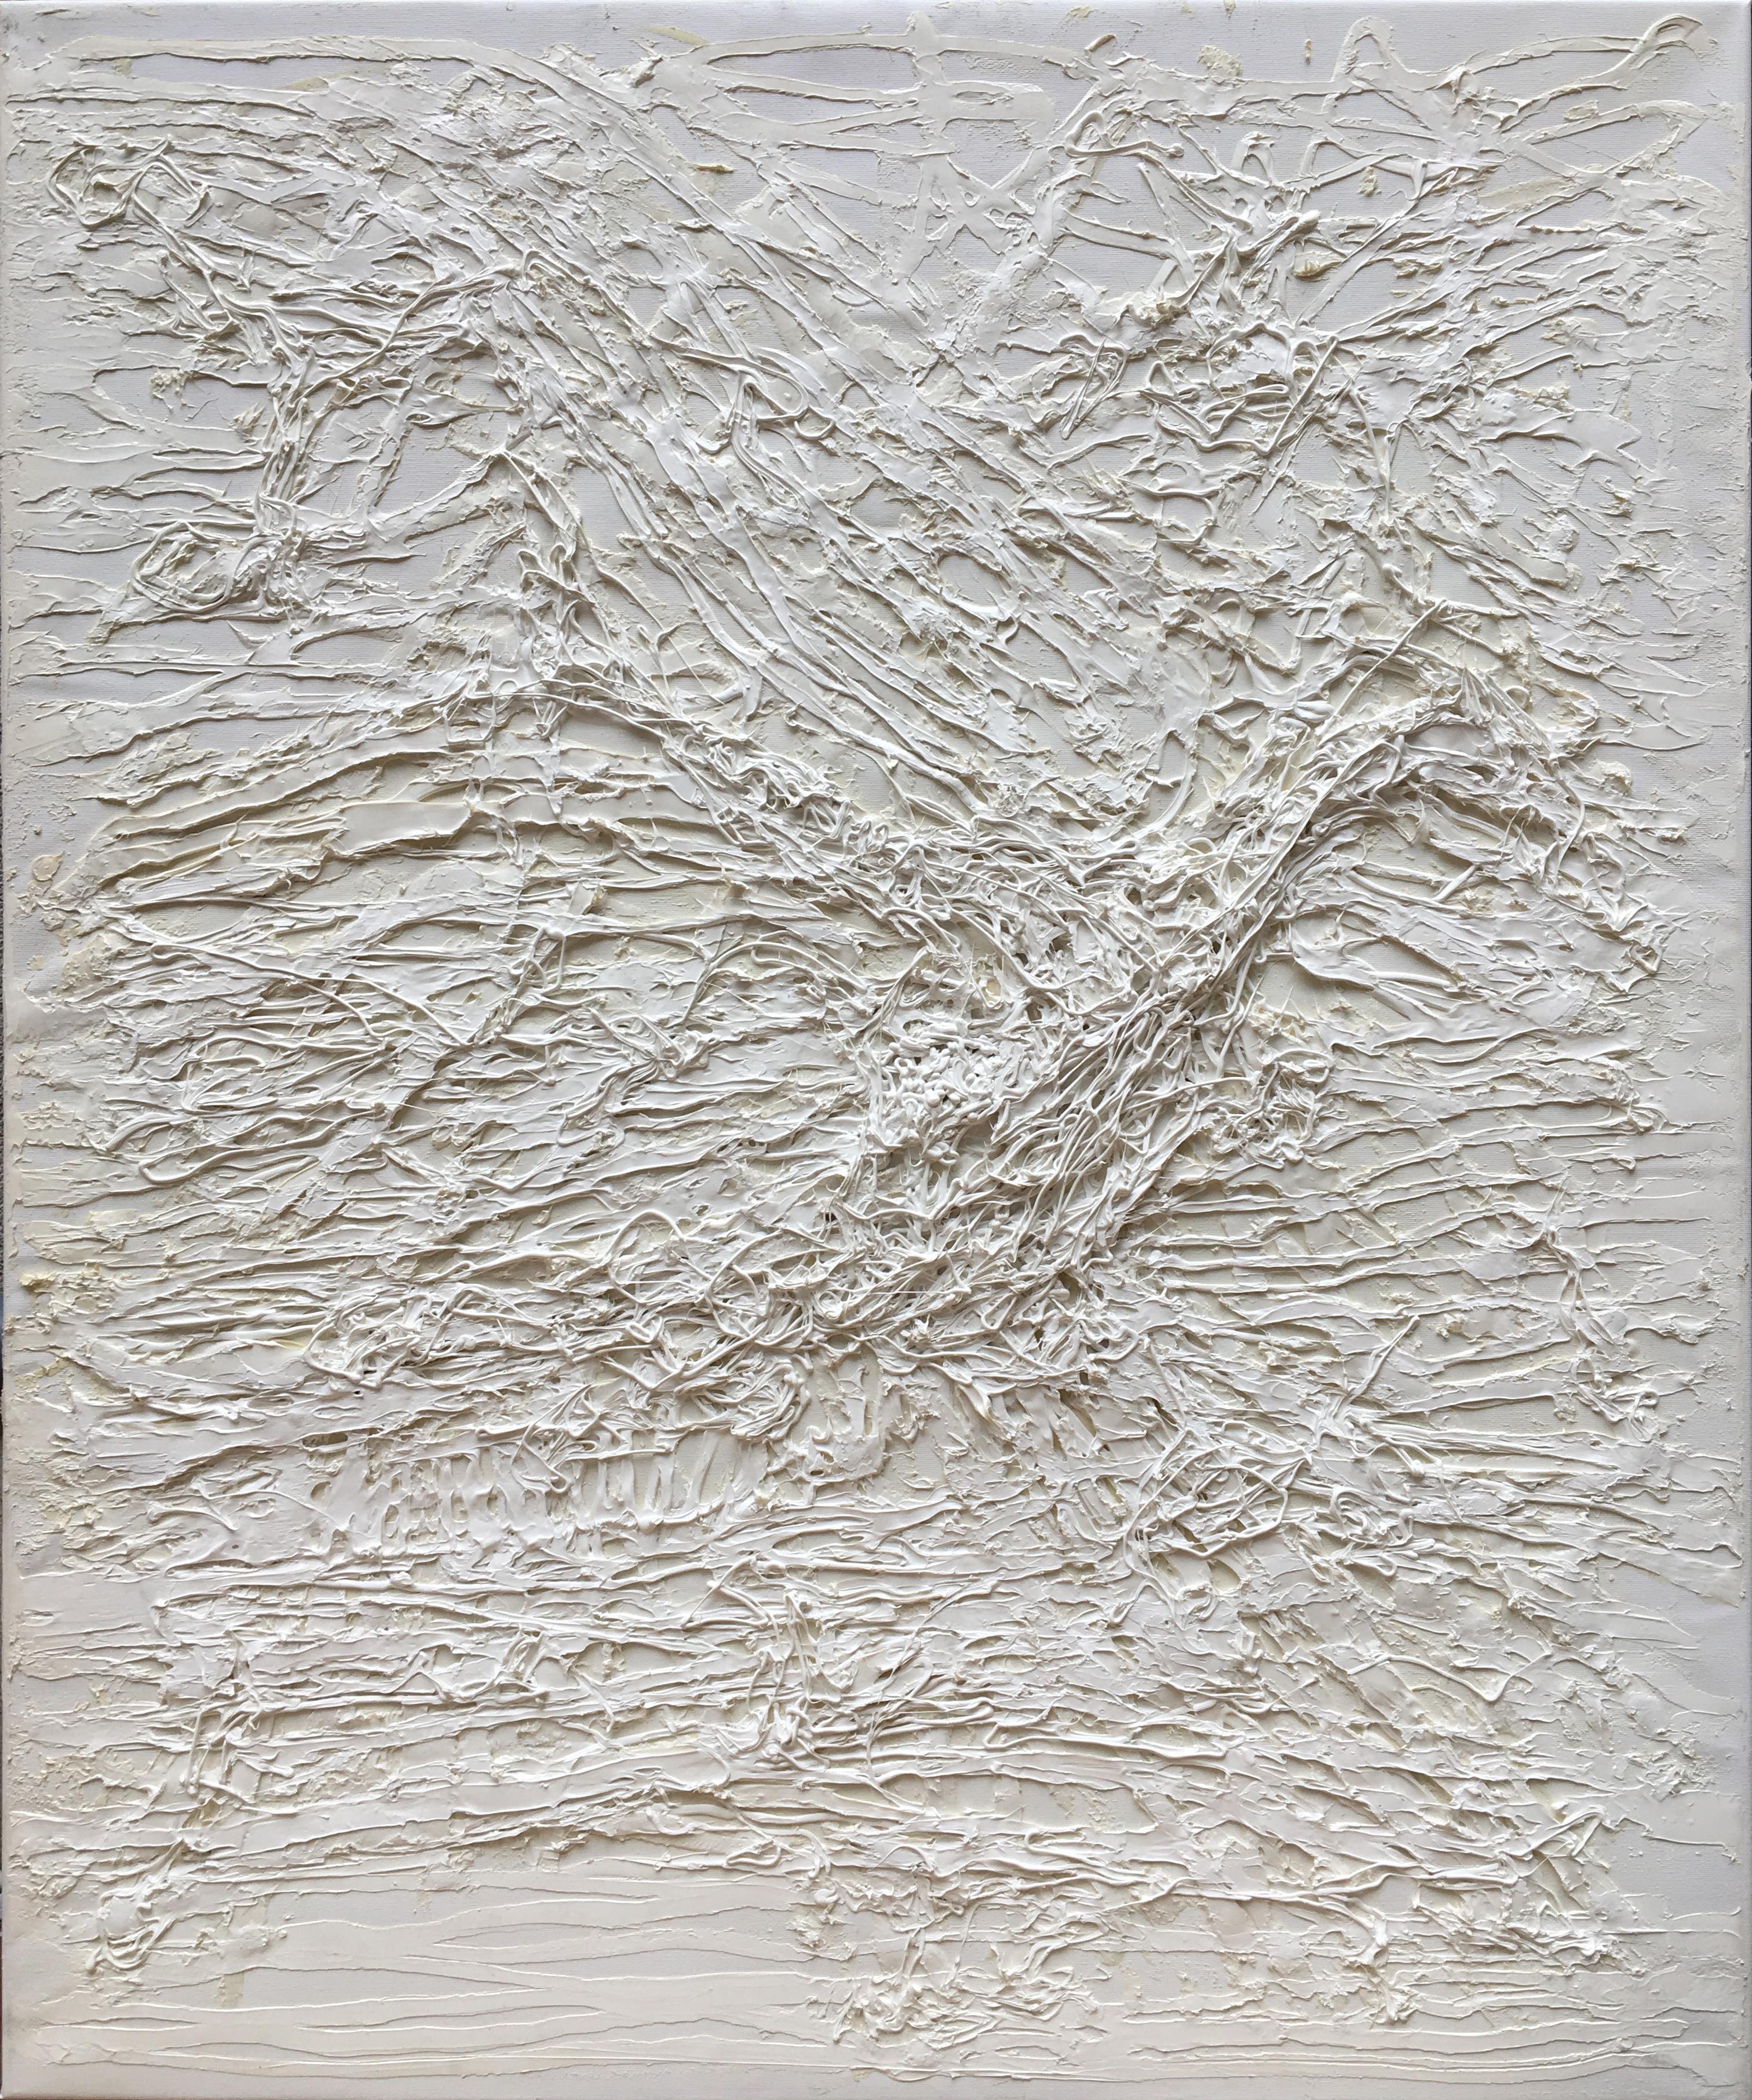 Untitled 01 - Contemporary, Abstract Painting, White, Monochrome, Organic